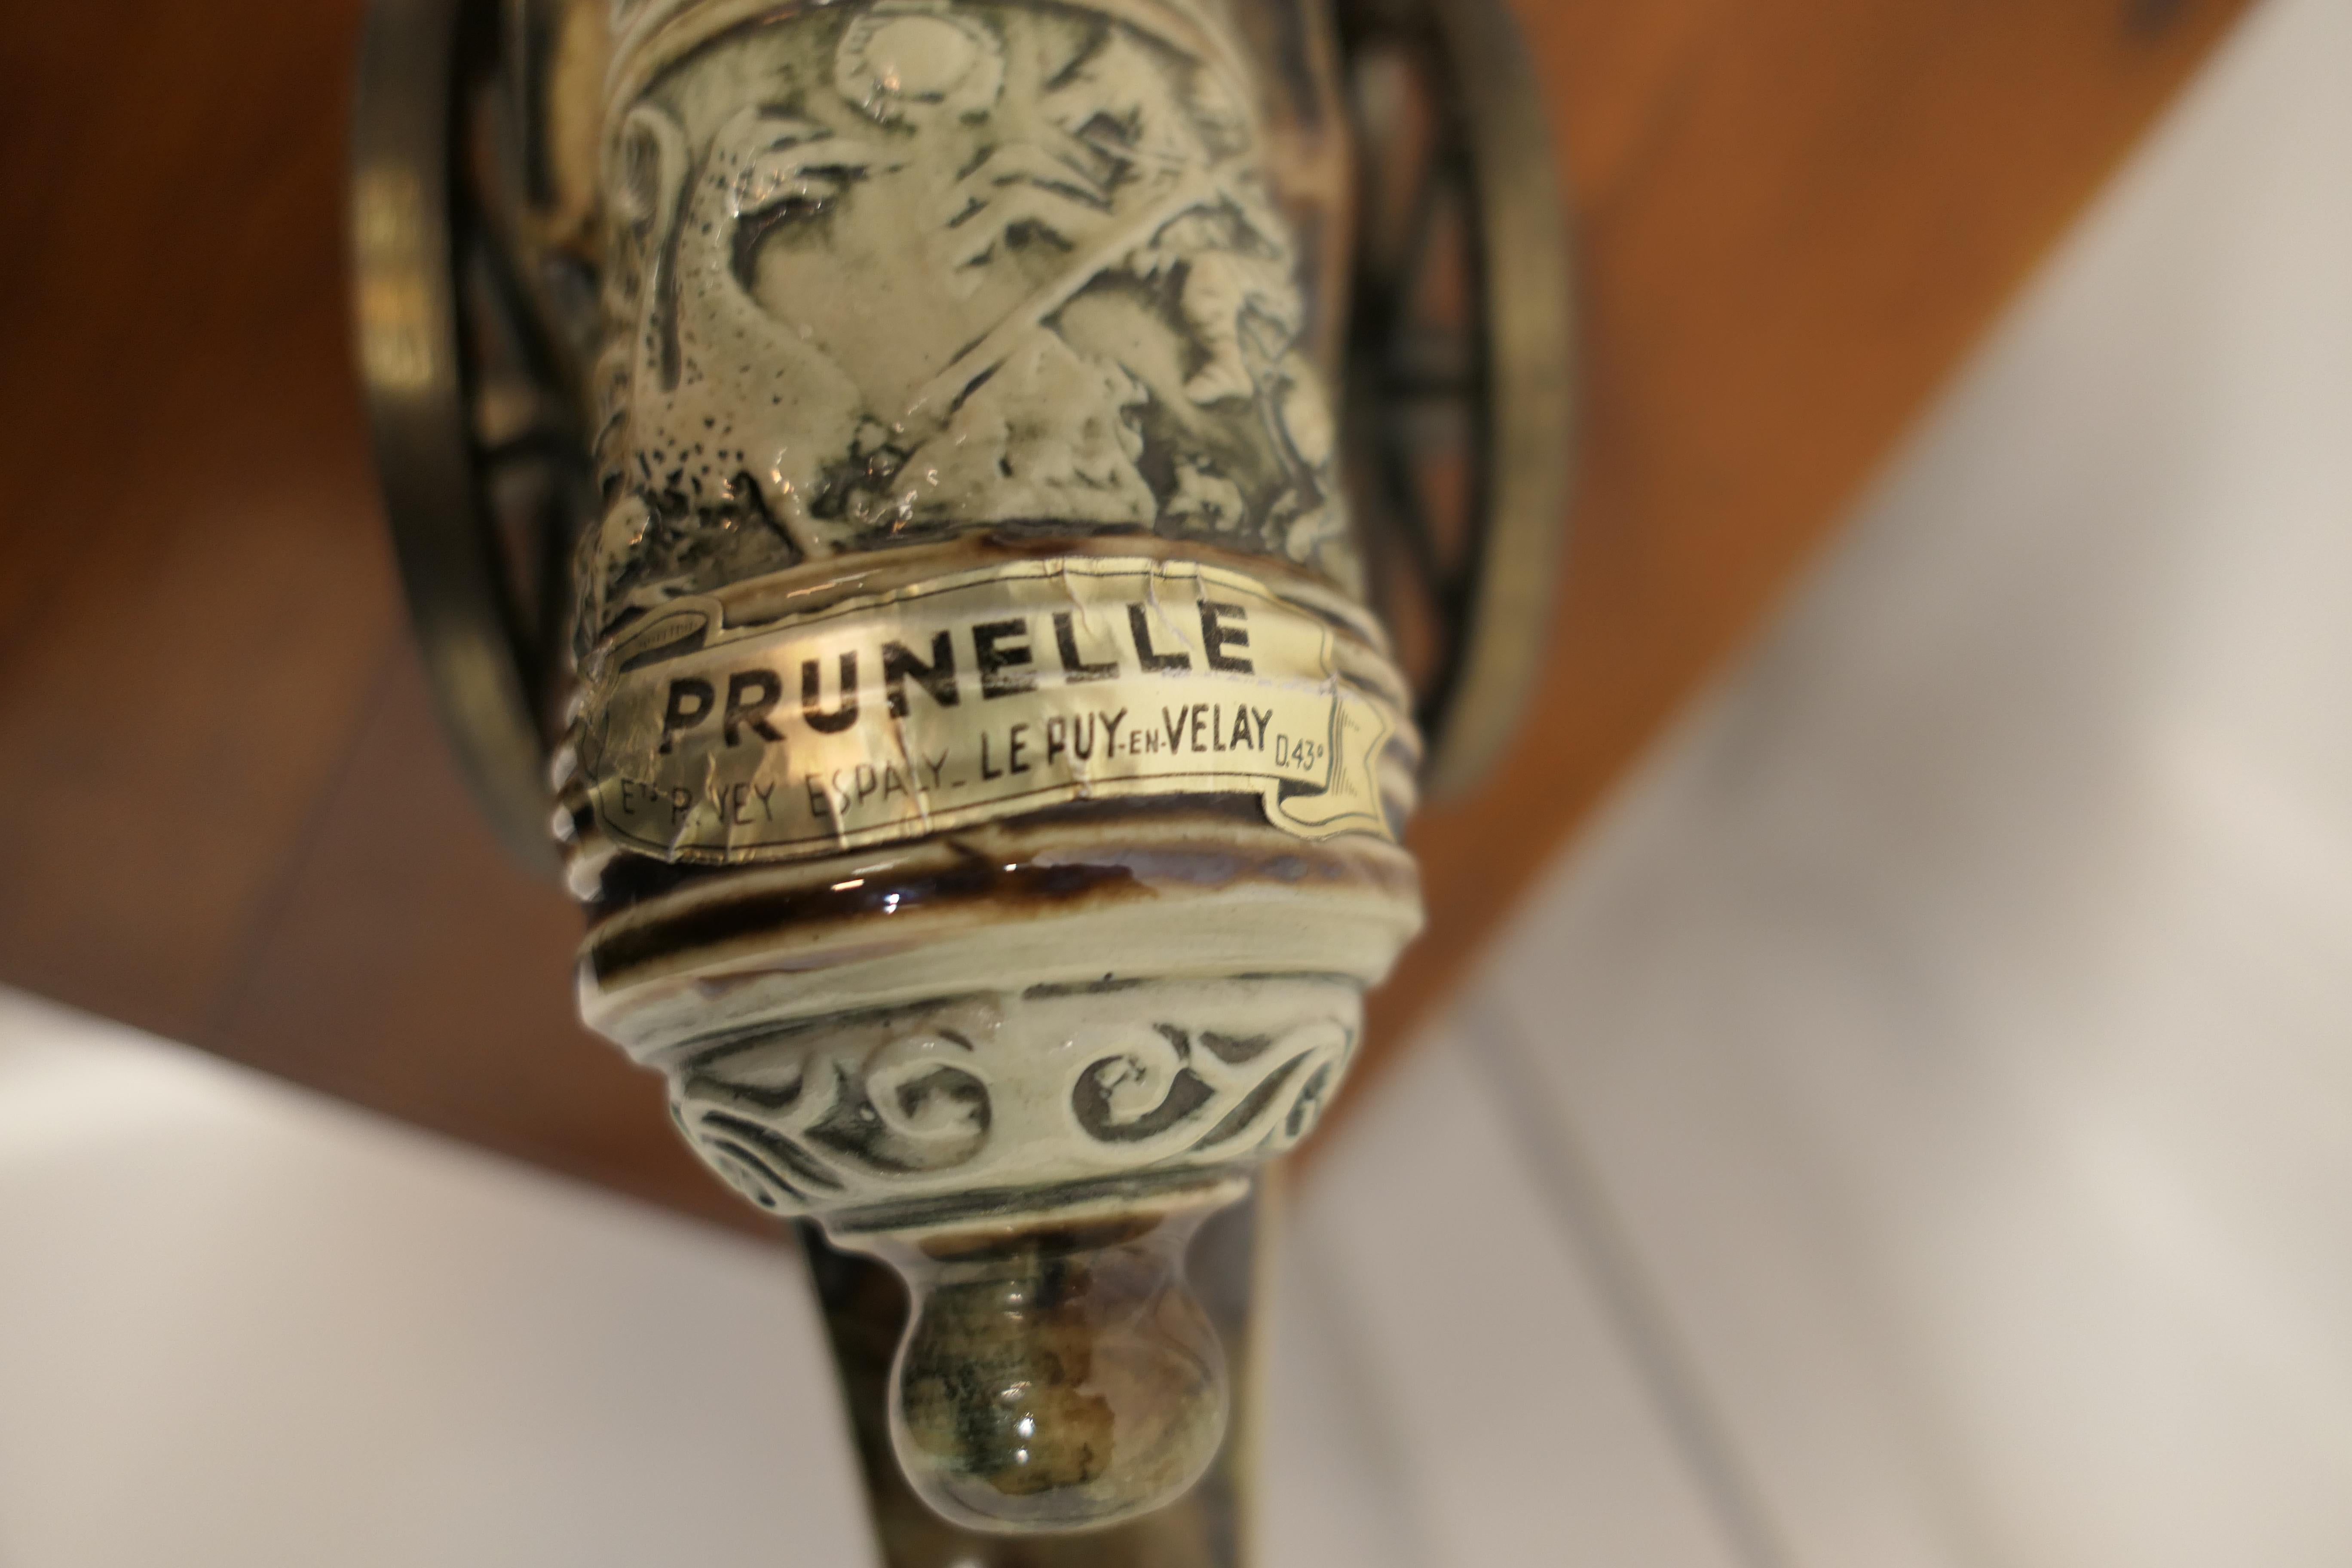 La Prunelle du Velay Stoneware Cannon Liqueur bottle 

A Charming Liqueur Carriage, made in stoneware, a decorative Napoleonic Cannon set on a metal gun carriage wheels and yes this will roll along the table and when tipped up will pour out your